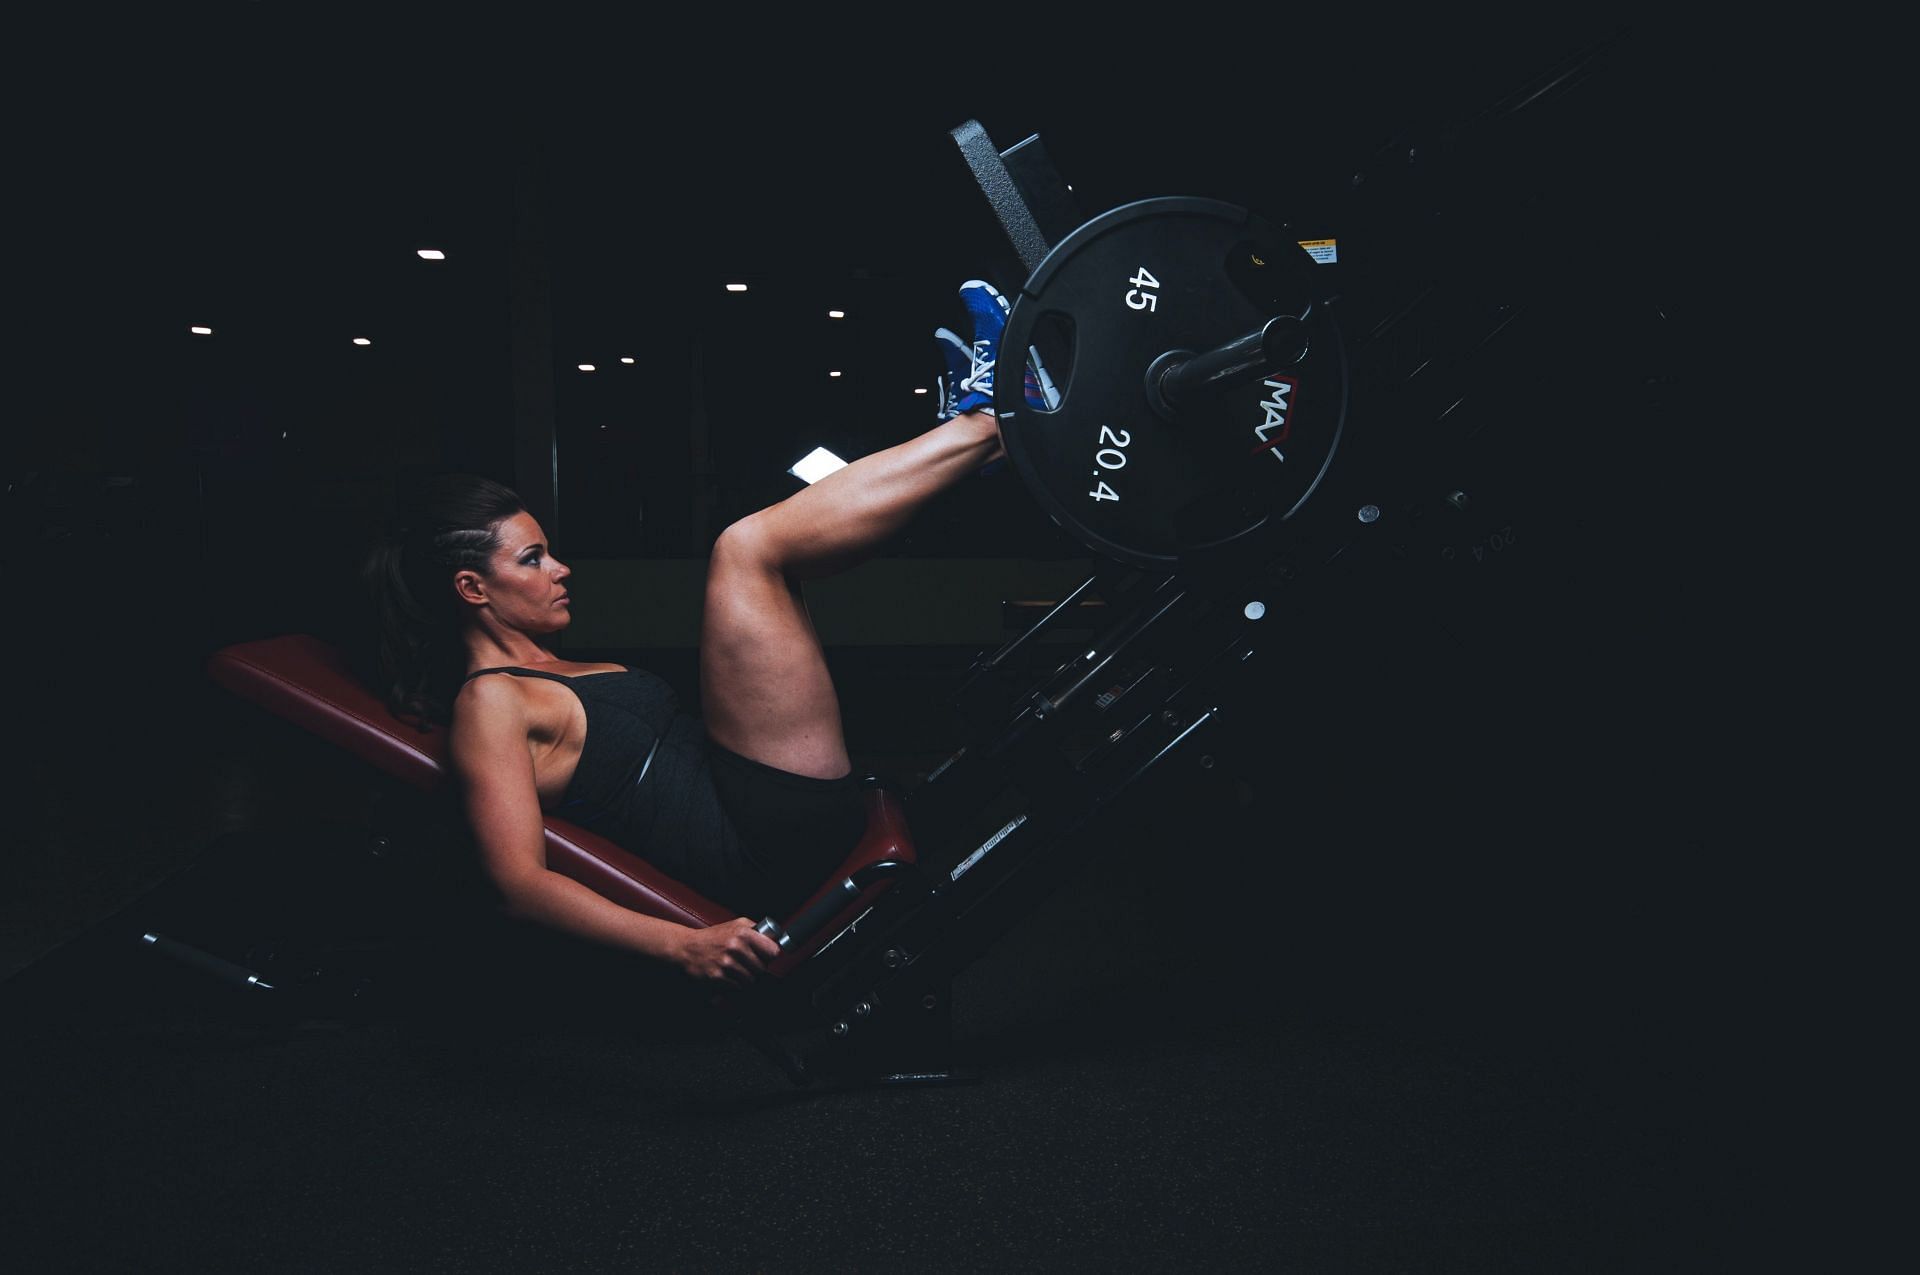 Limited equipment is available in the gym (Image via Pexels / Scott Webb)